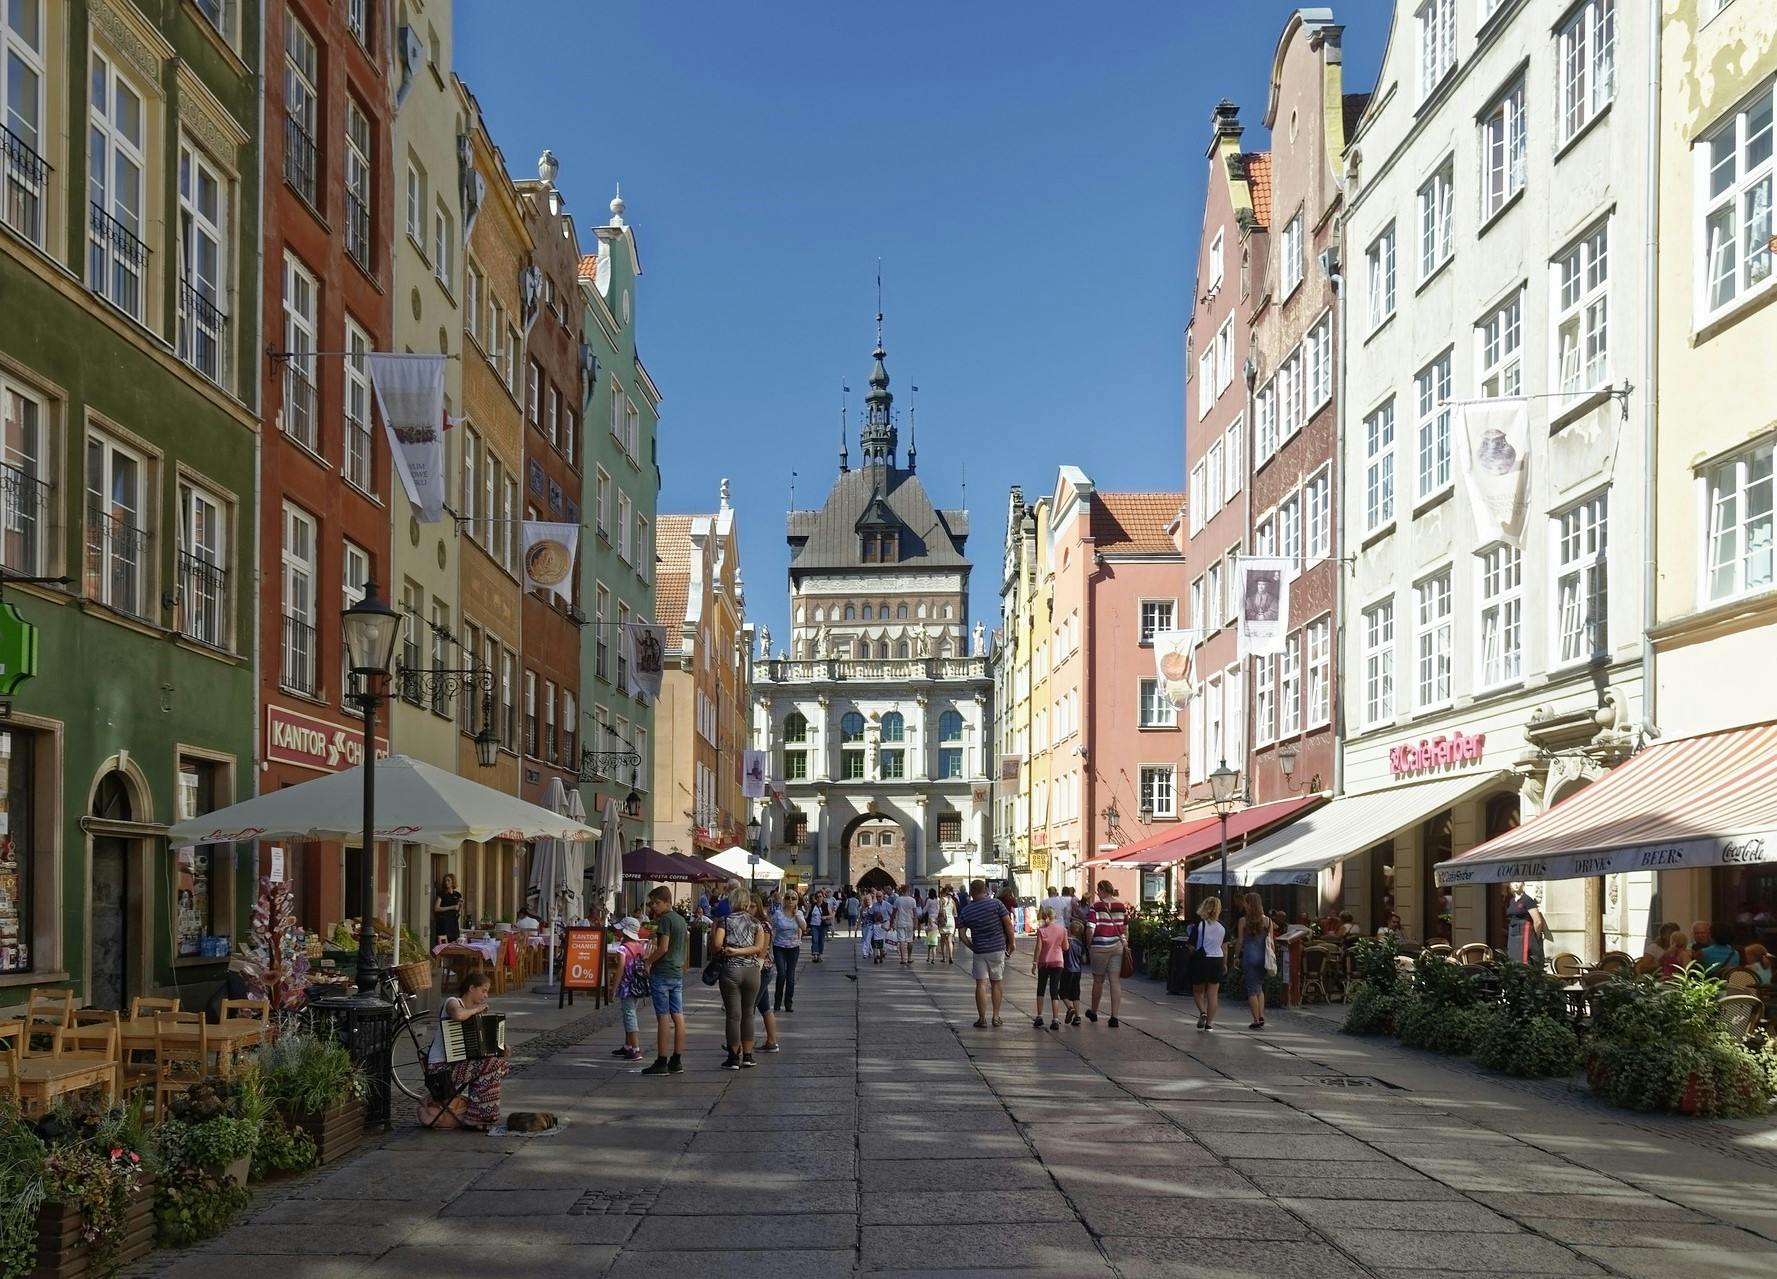 Self-guided tour of Gdansk with audioguide